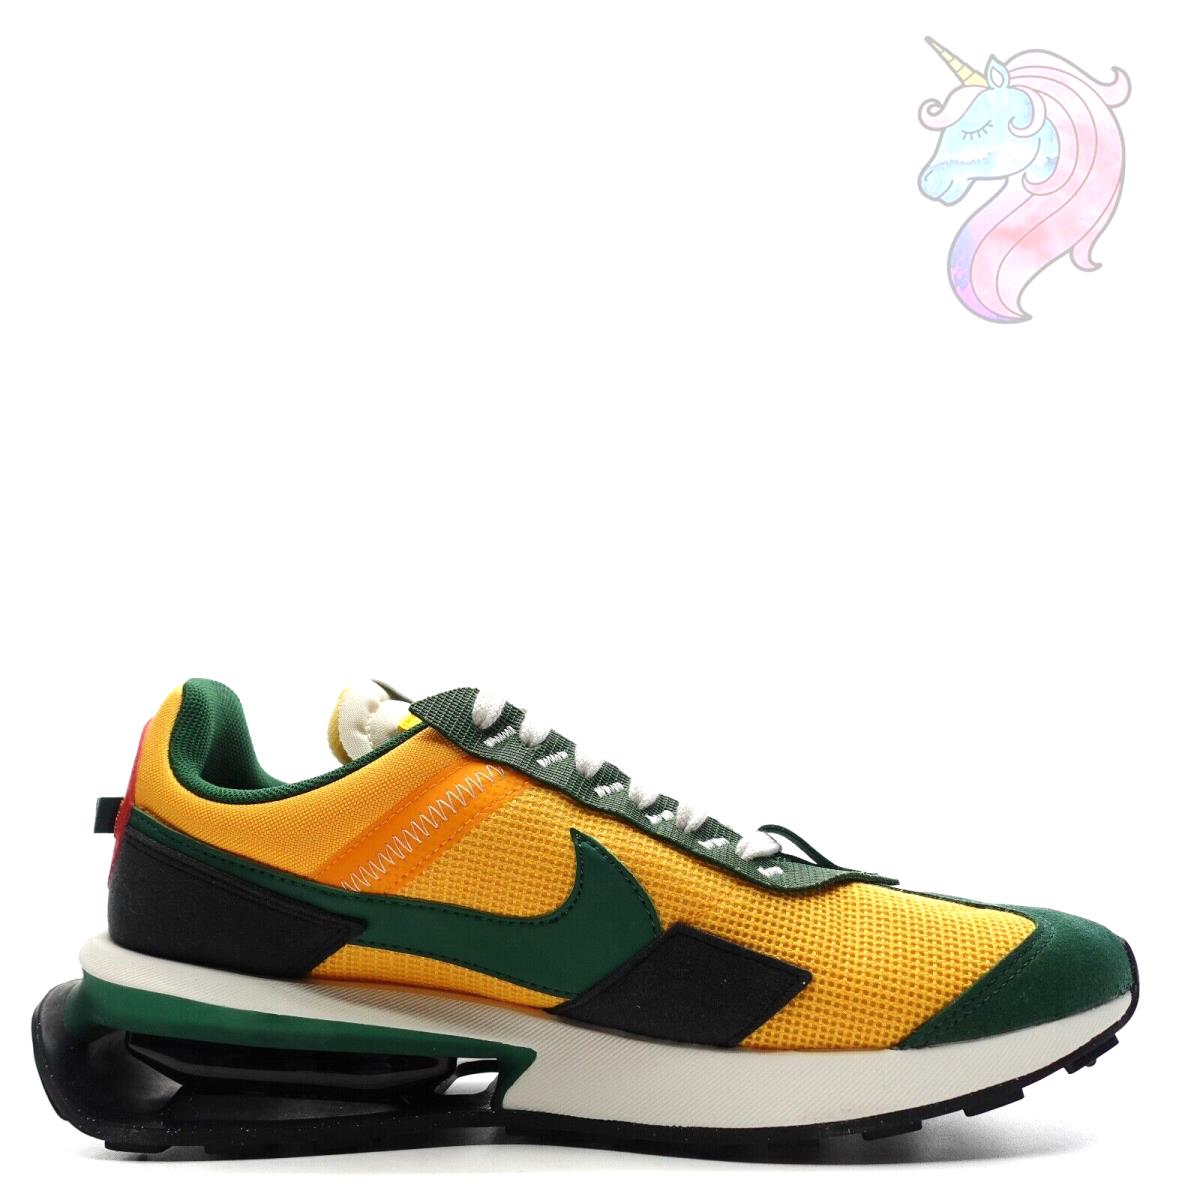 Nike Air Max Pre-day University Gold Green Shoes Men`s Size 9 DM0008-700